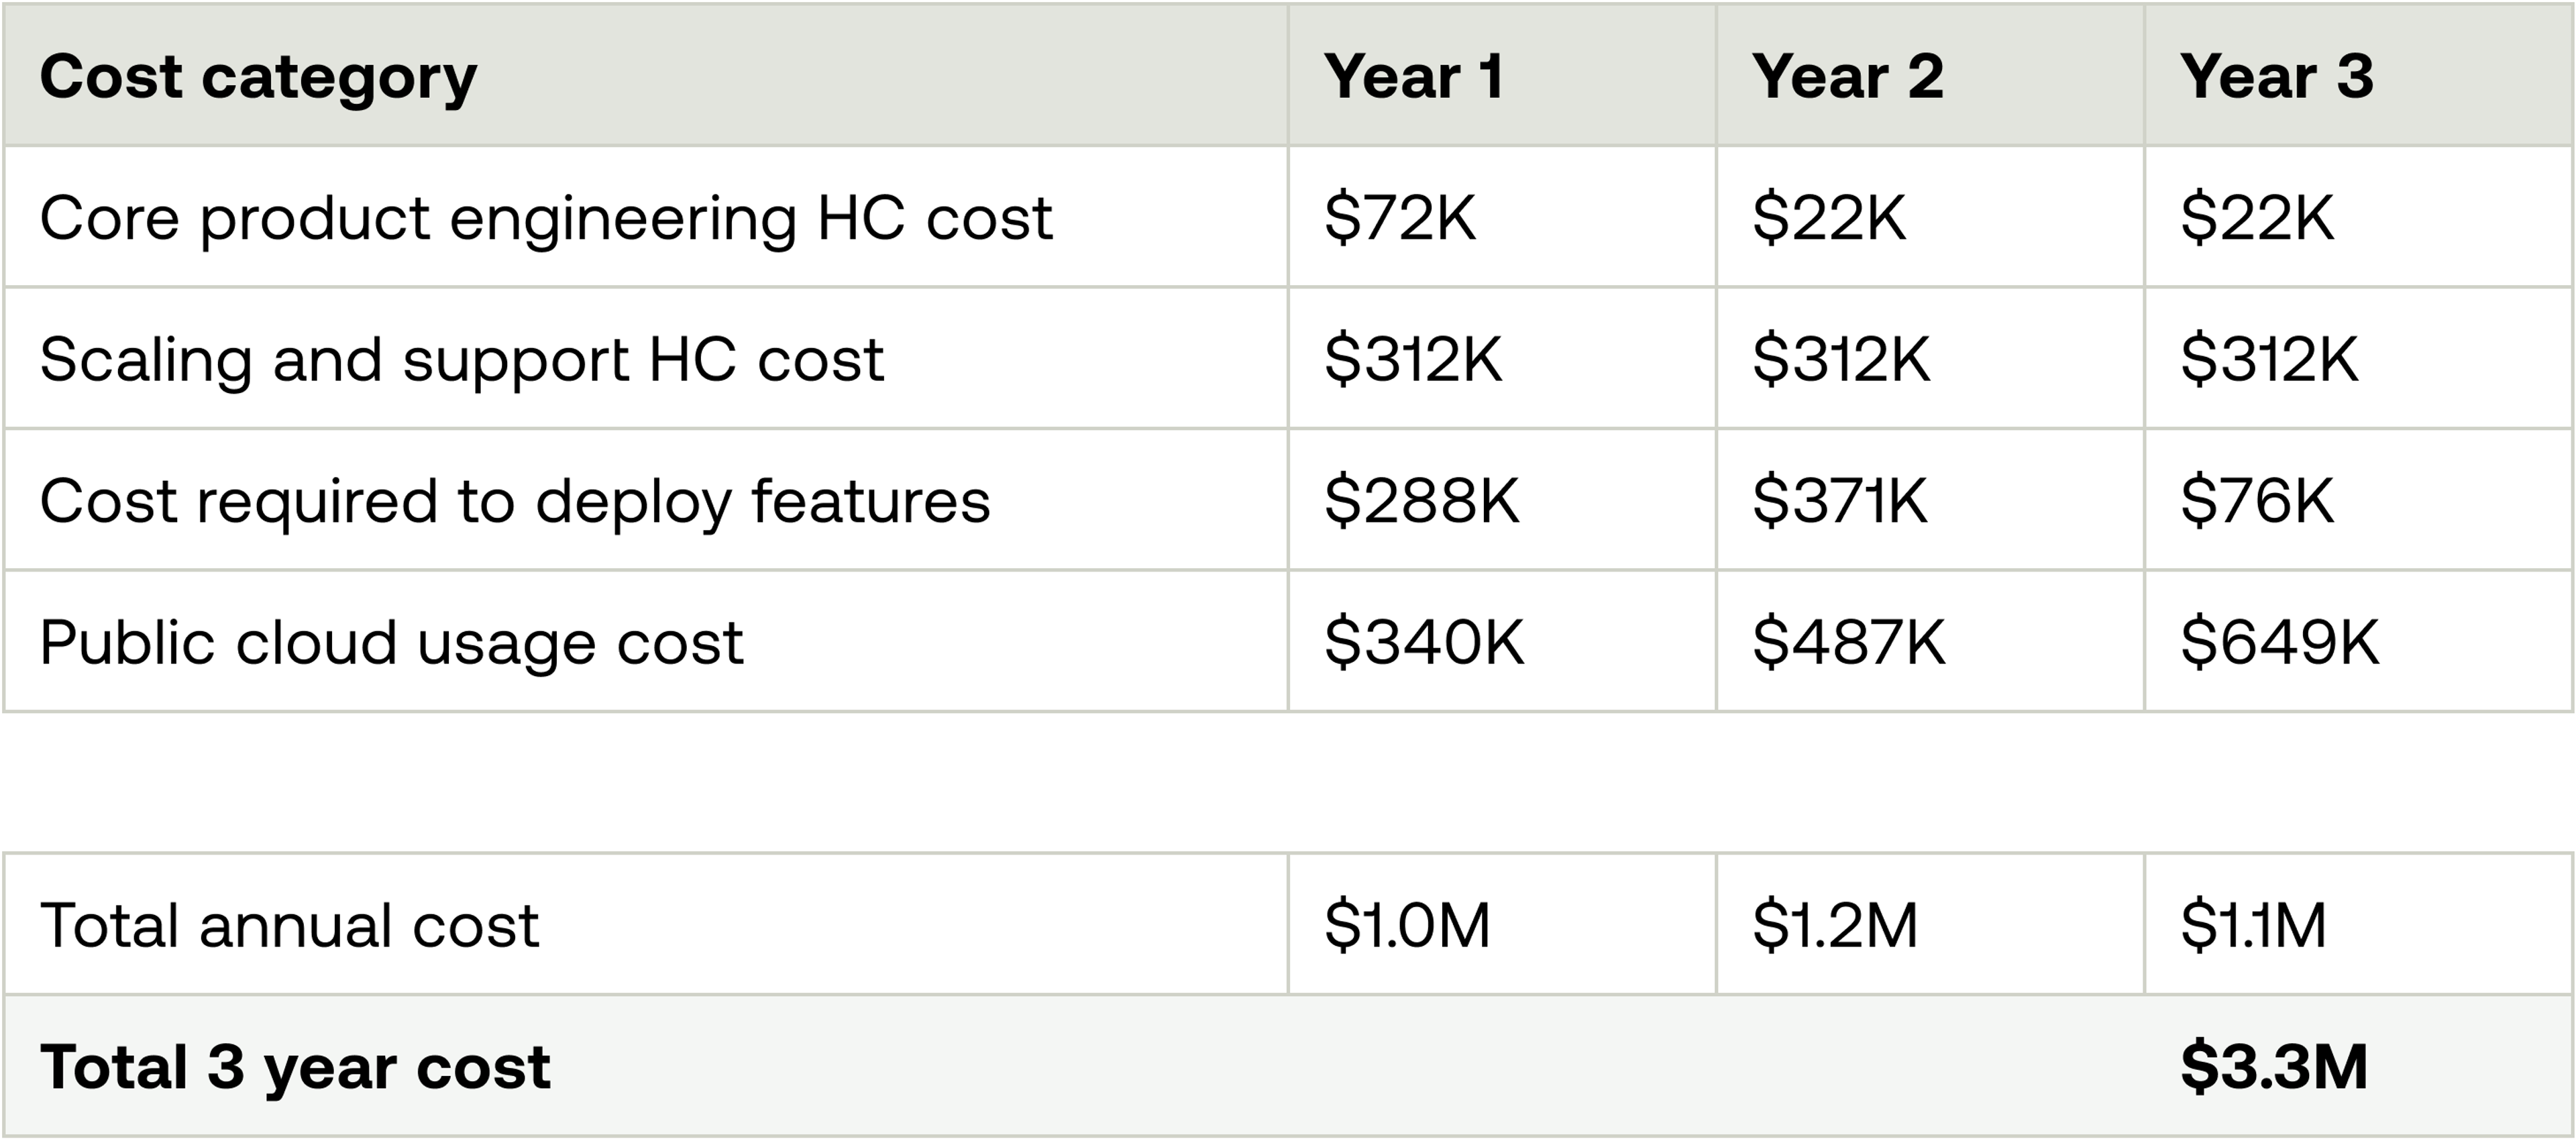 Table summing up the costs breakdowns above. Total 3 year cost building on your own is $3.3M.